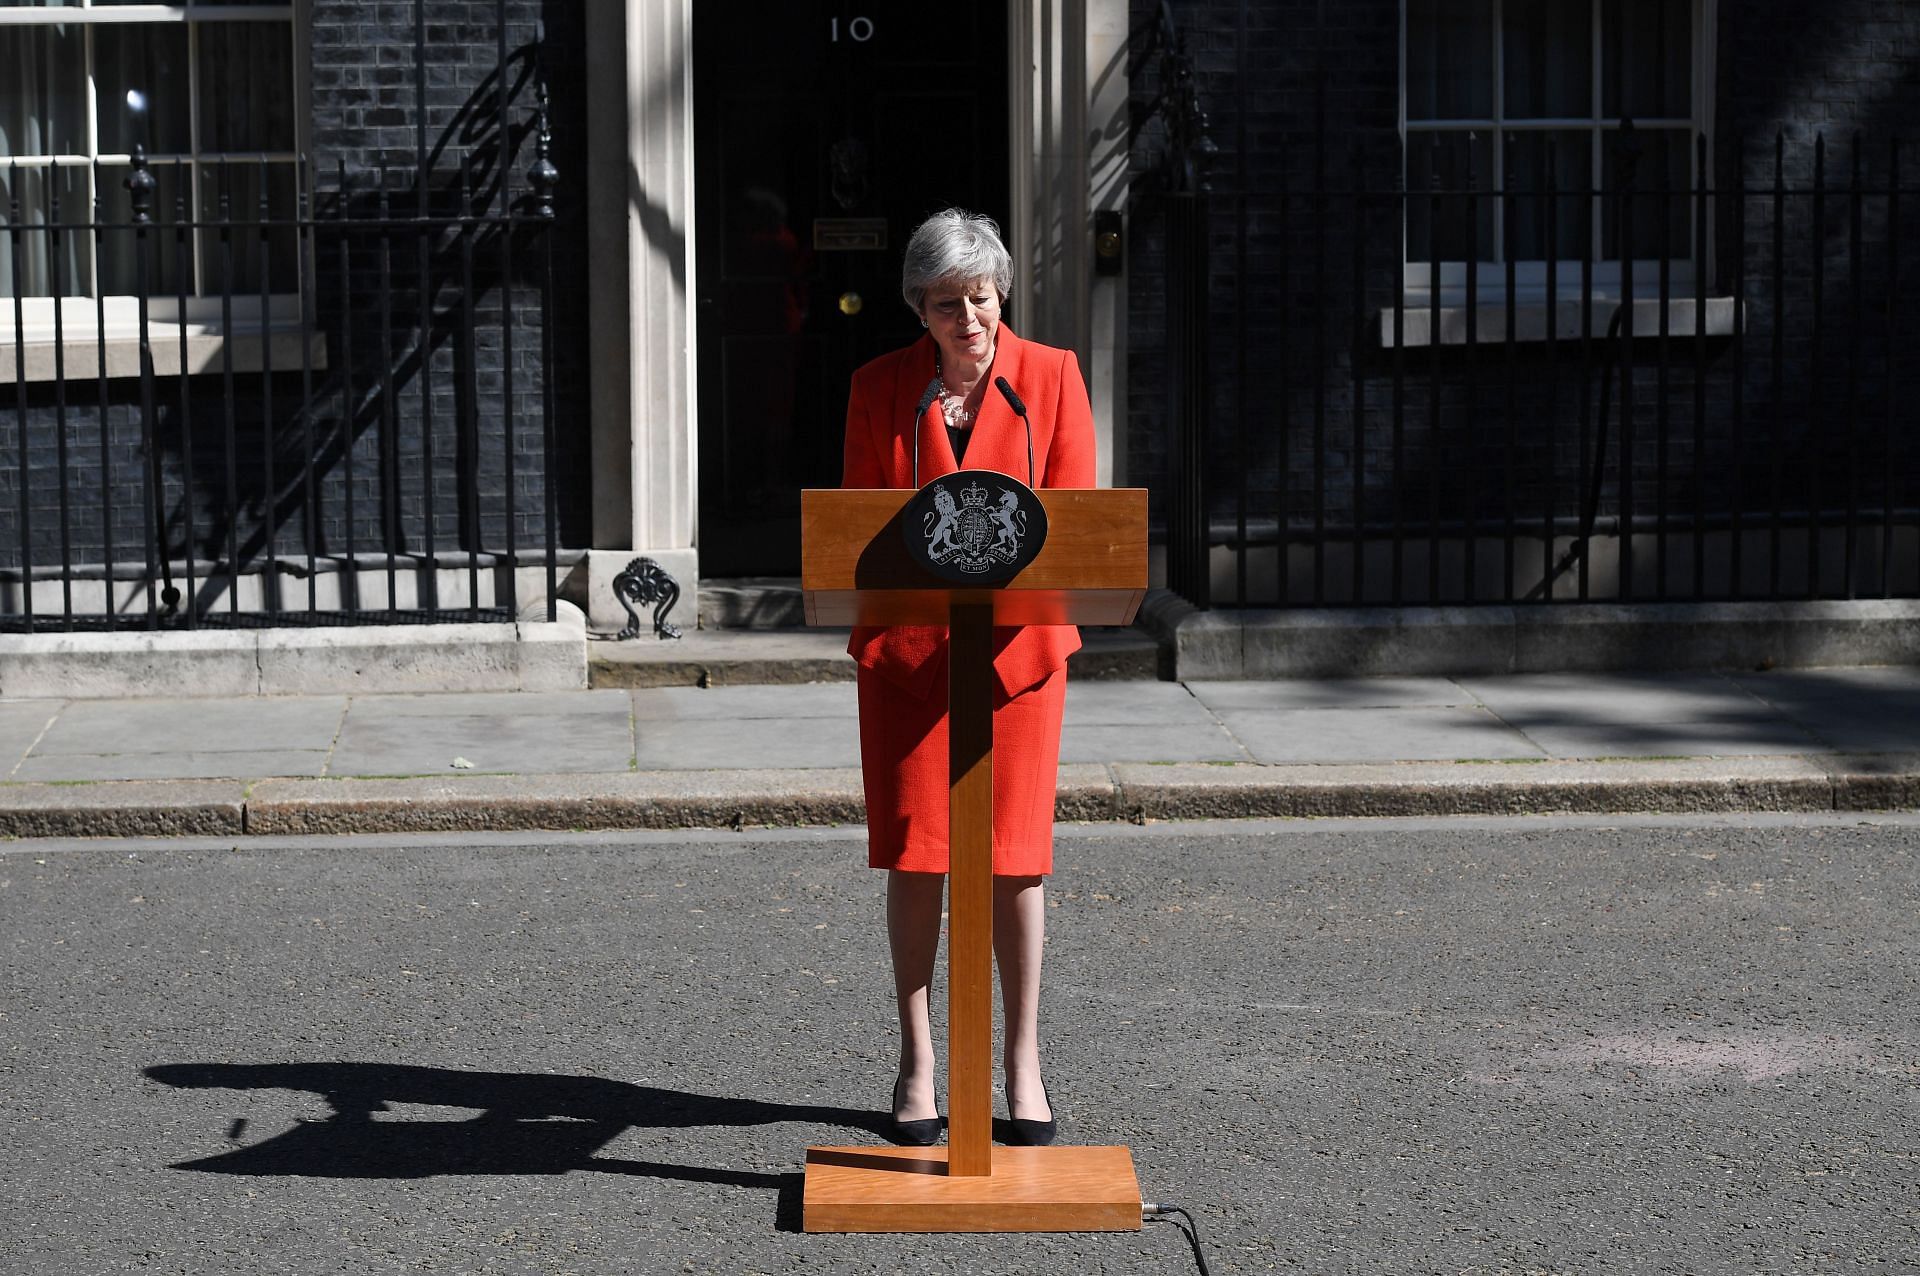 May announcing her resignation in May 2019 (Image via Getty Images)